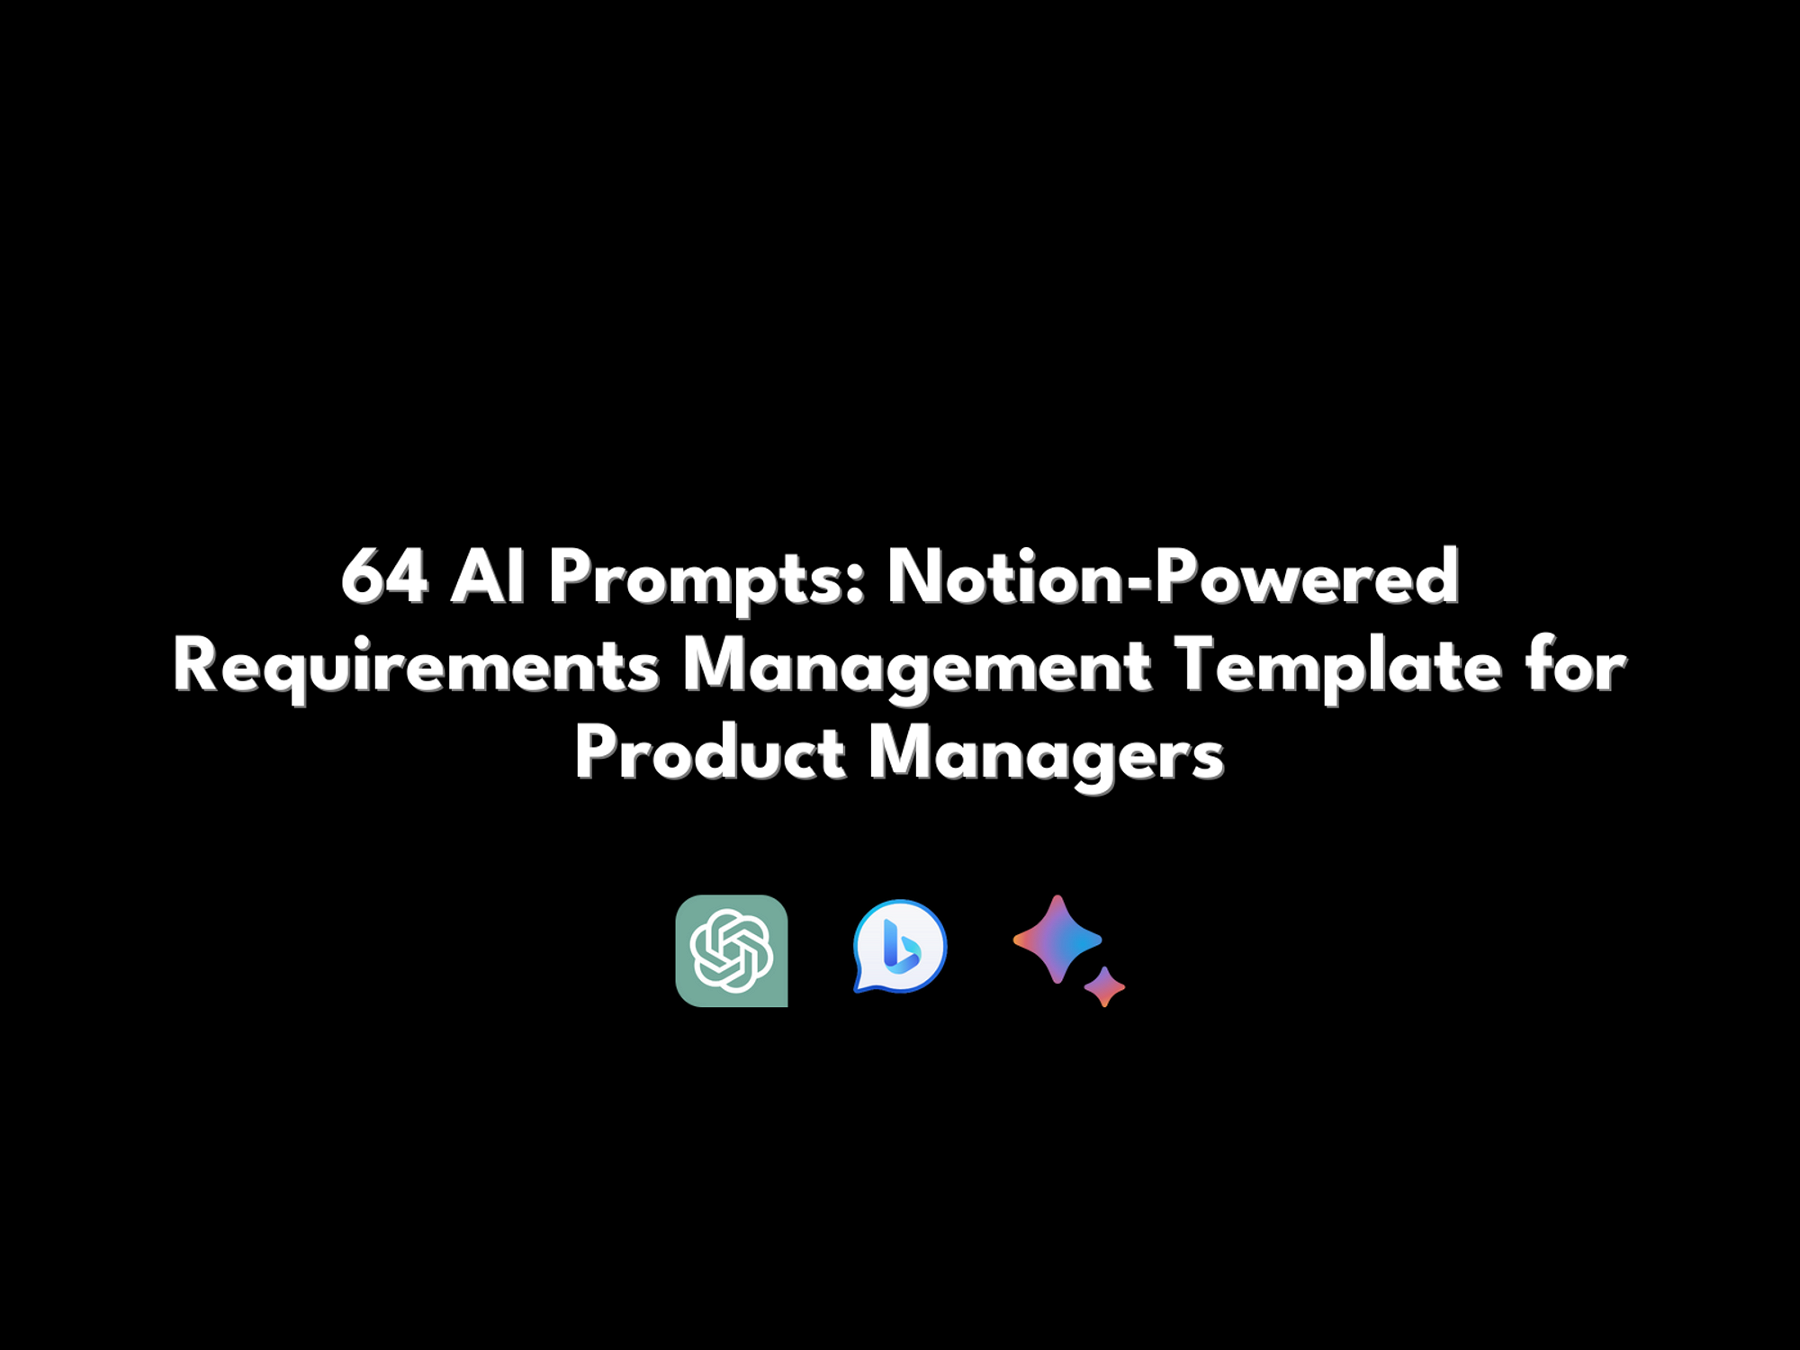 64 ChatGPT Prompts for Requirements Management